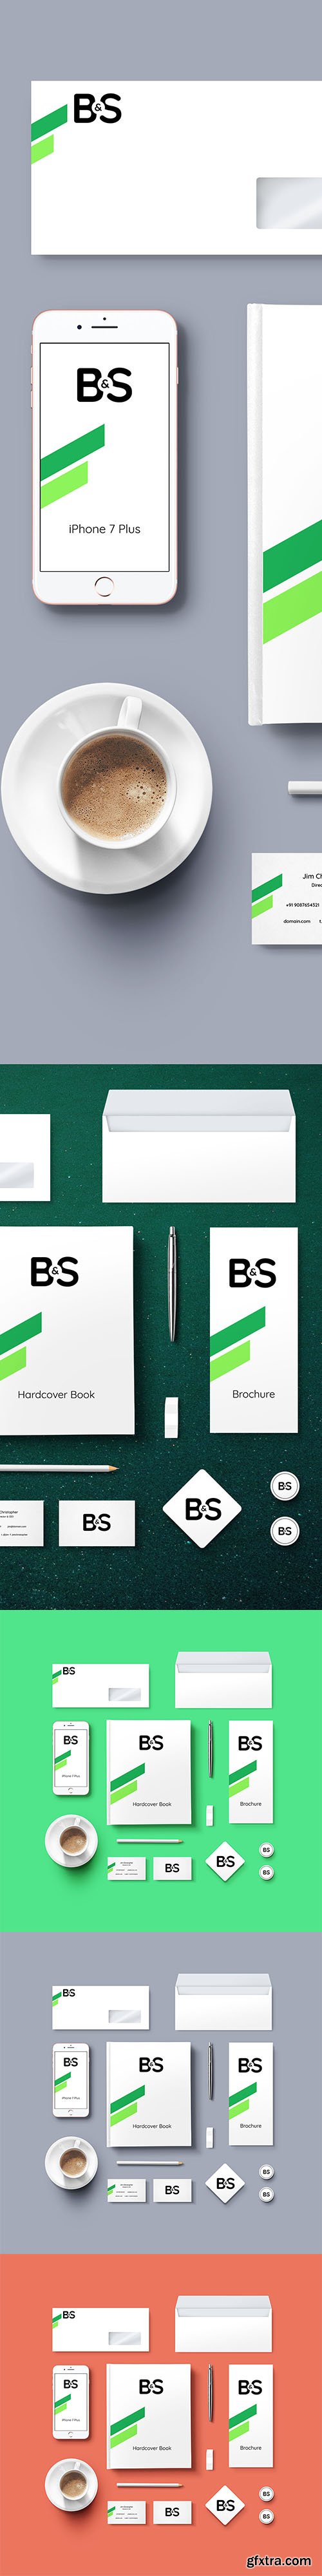 PSD Mock-Up - Branding And Stationery 2016